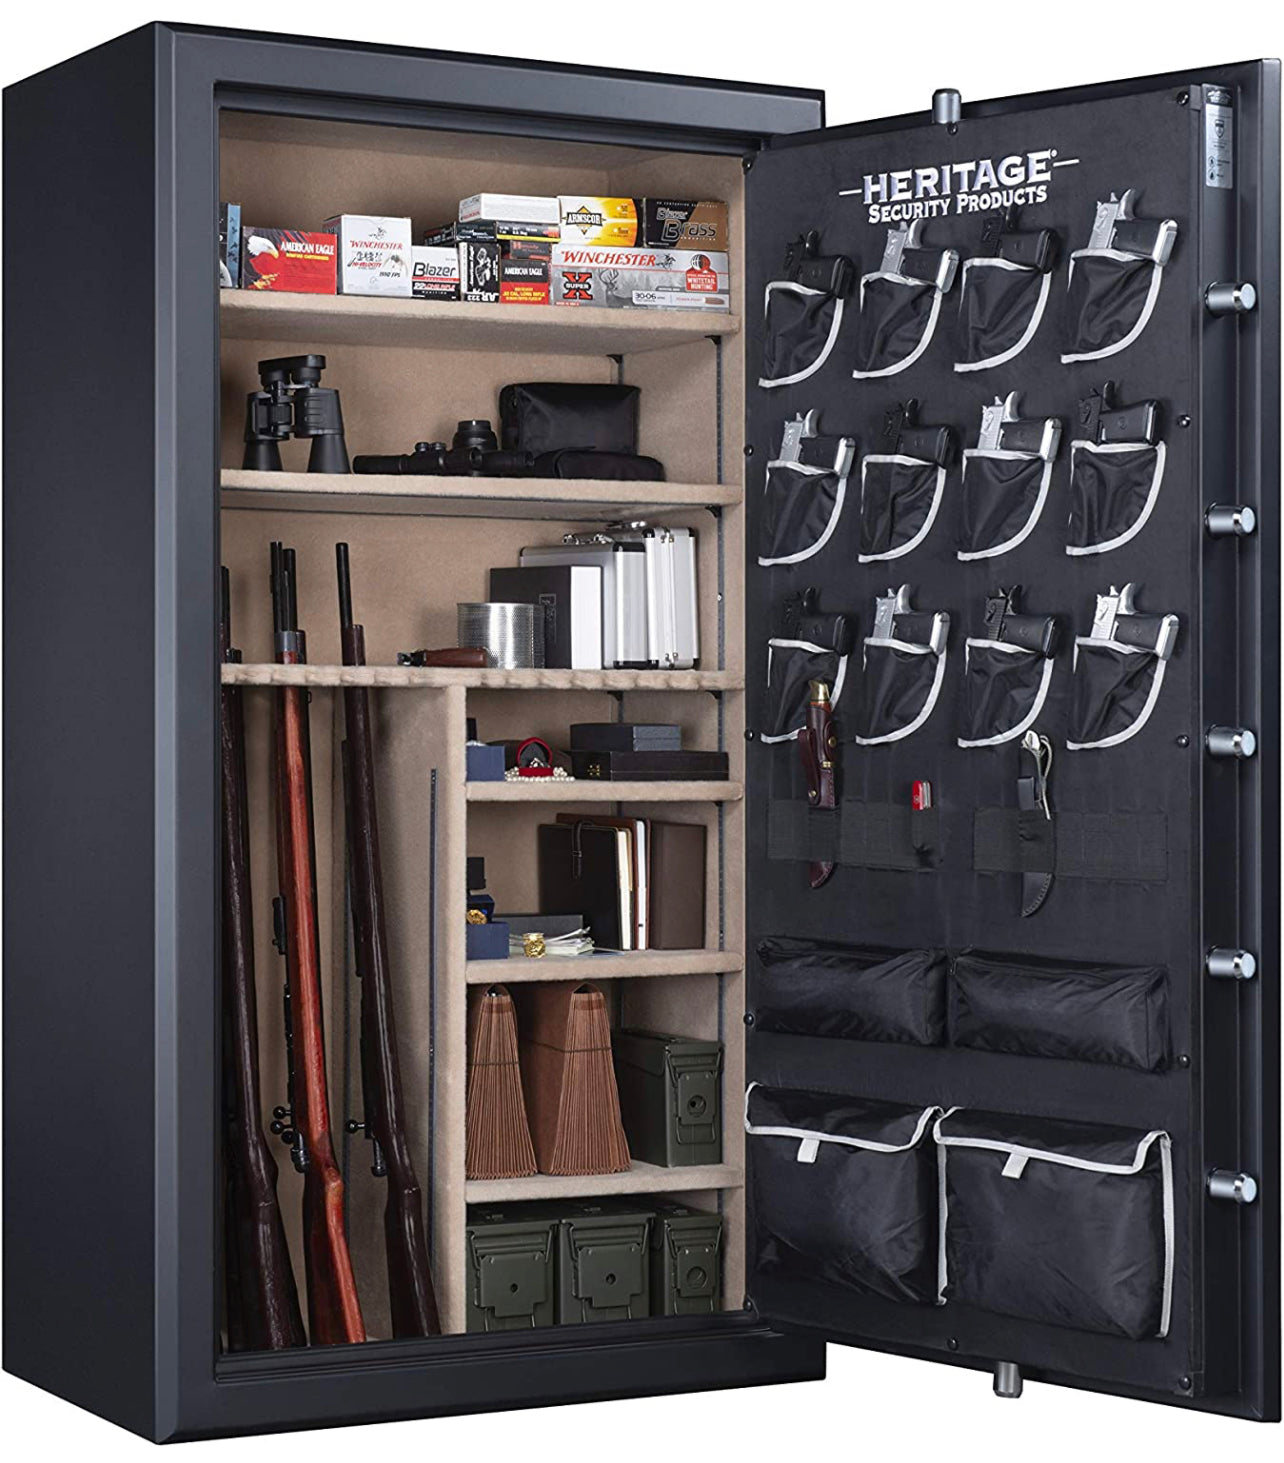 Heritage 24 Gun Fire And Water Safe With E-Lock - $760